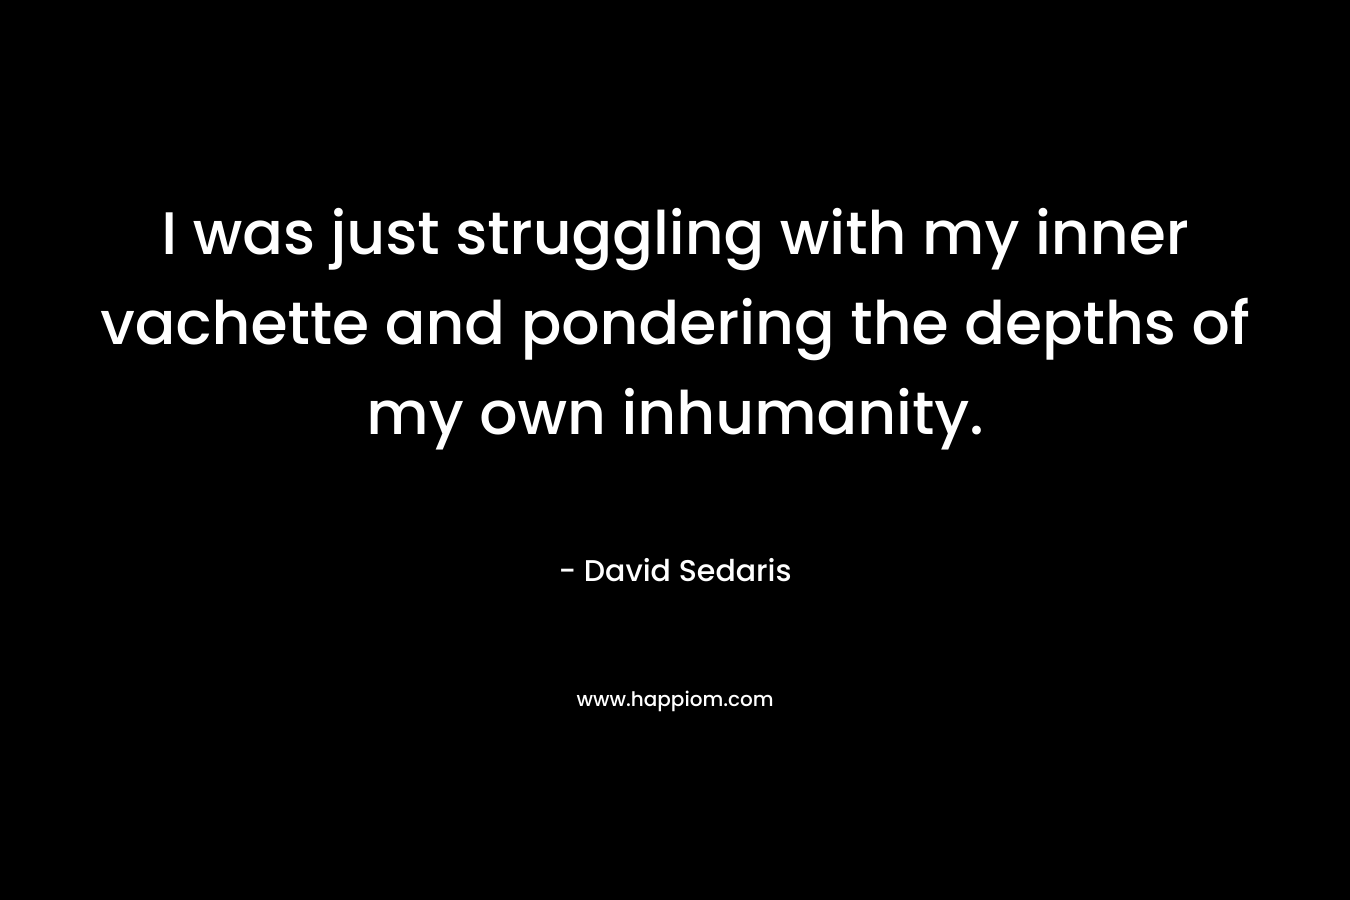 I was just struggling with my inner vachette and pondering the depths of my own inhumanity. – David Sedaris